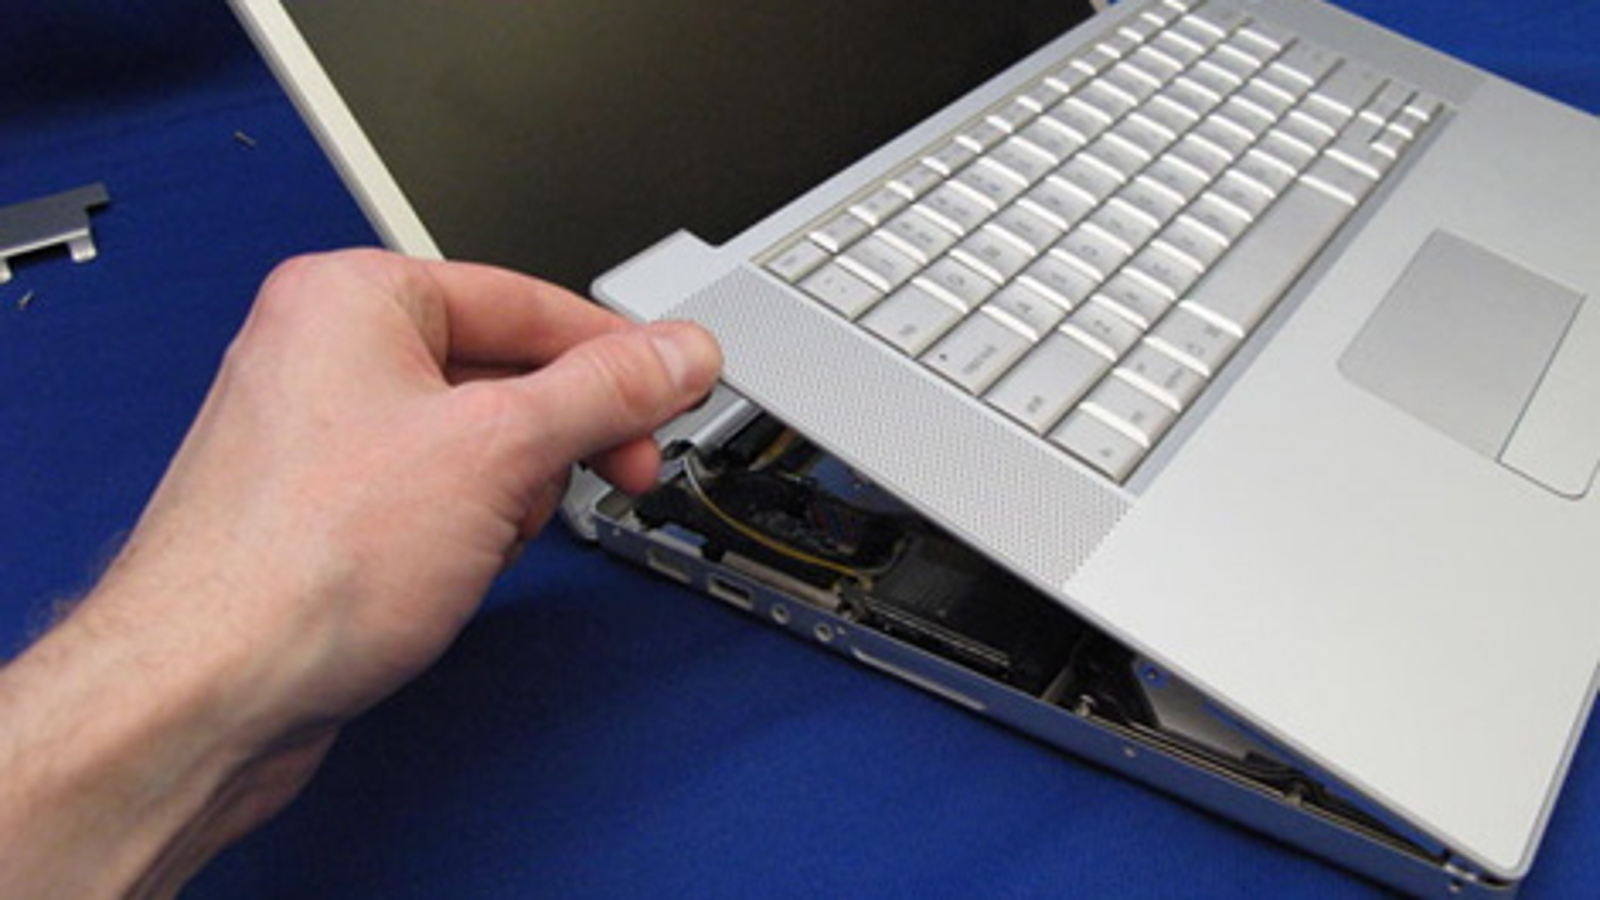 how to clean hard drive on macbook pro